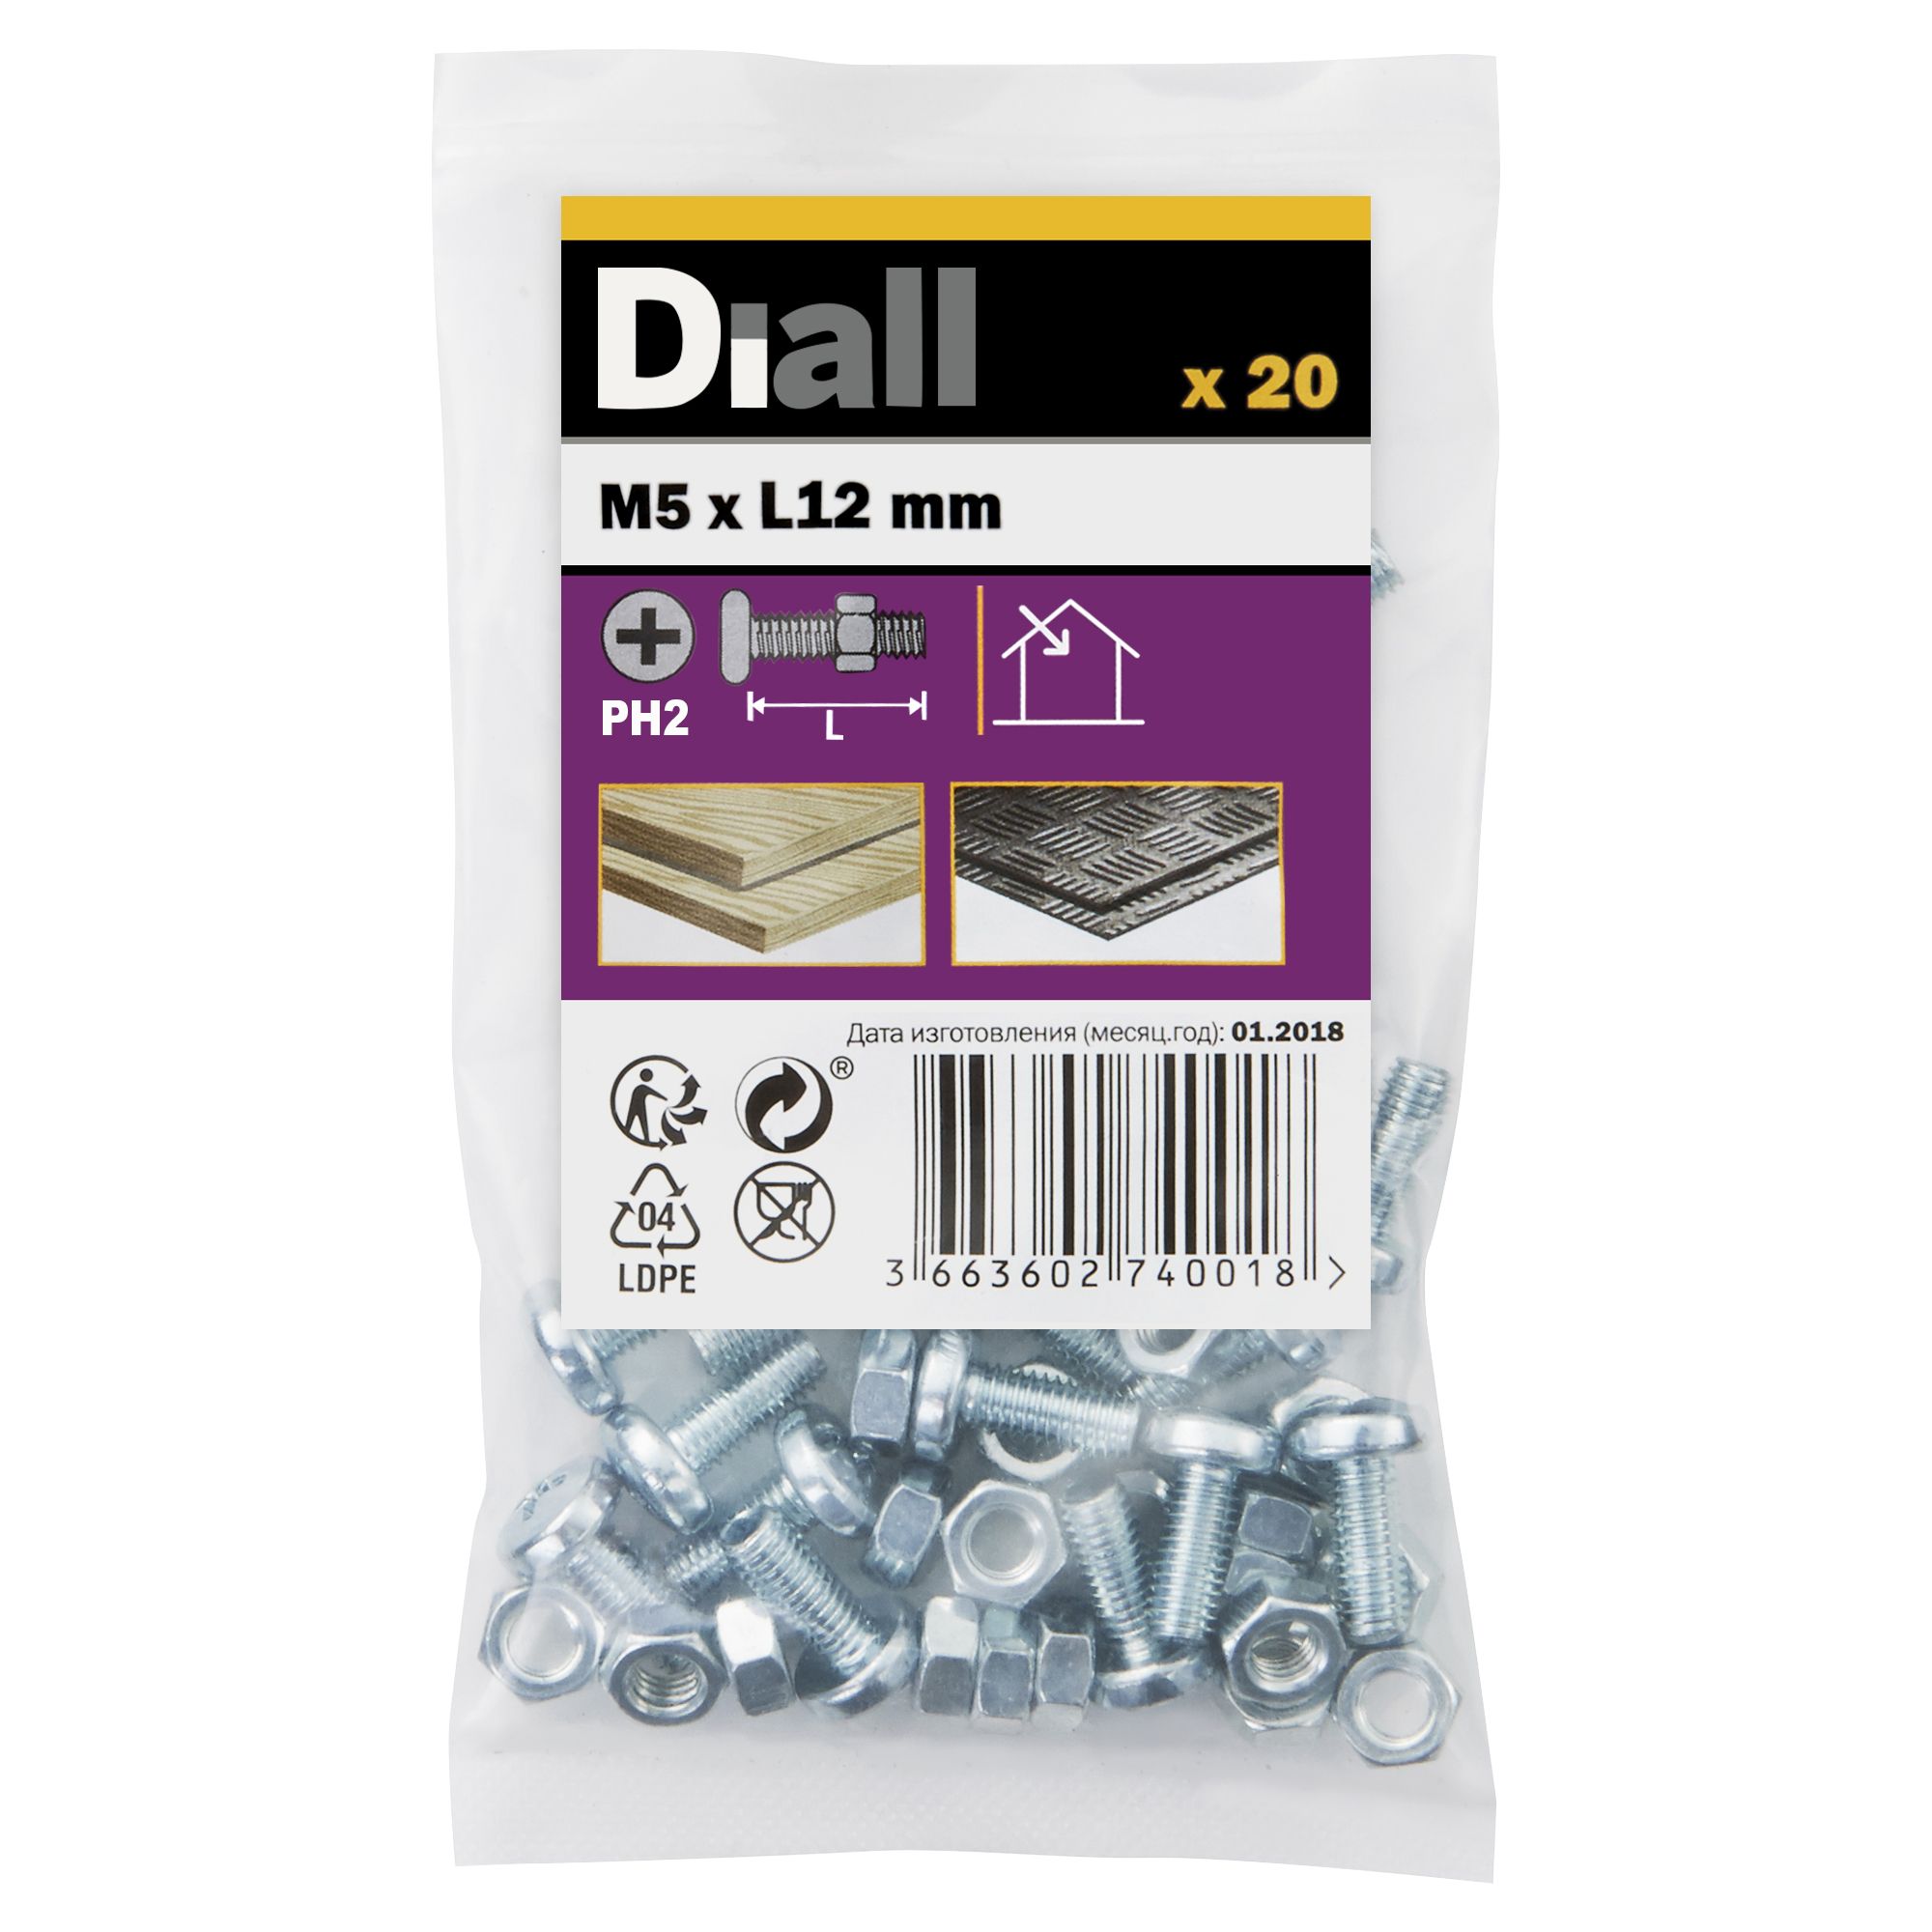 Diall M5 Cruciform Philips Pan head Zinc-plated Carbon steel Machine screw & nut (Dia)5mm (L)12mm, Pack of 20